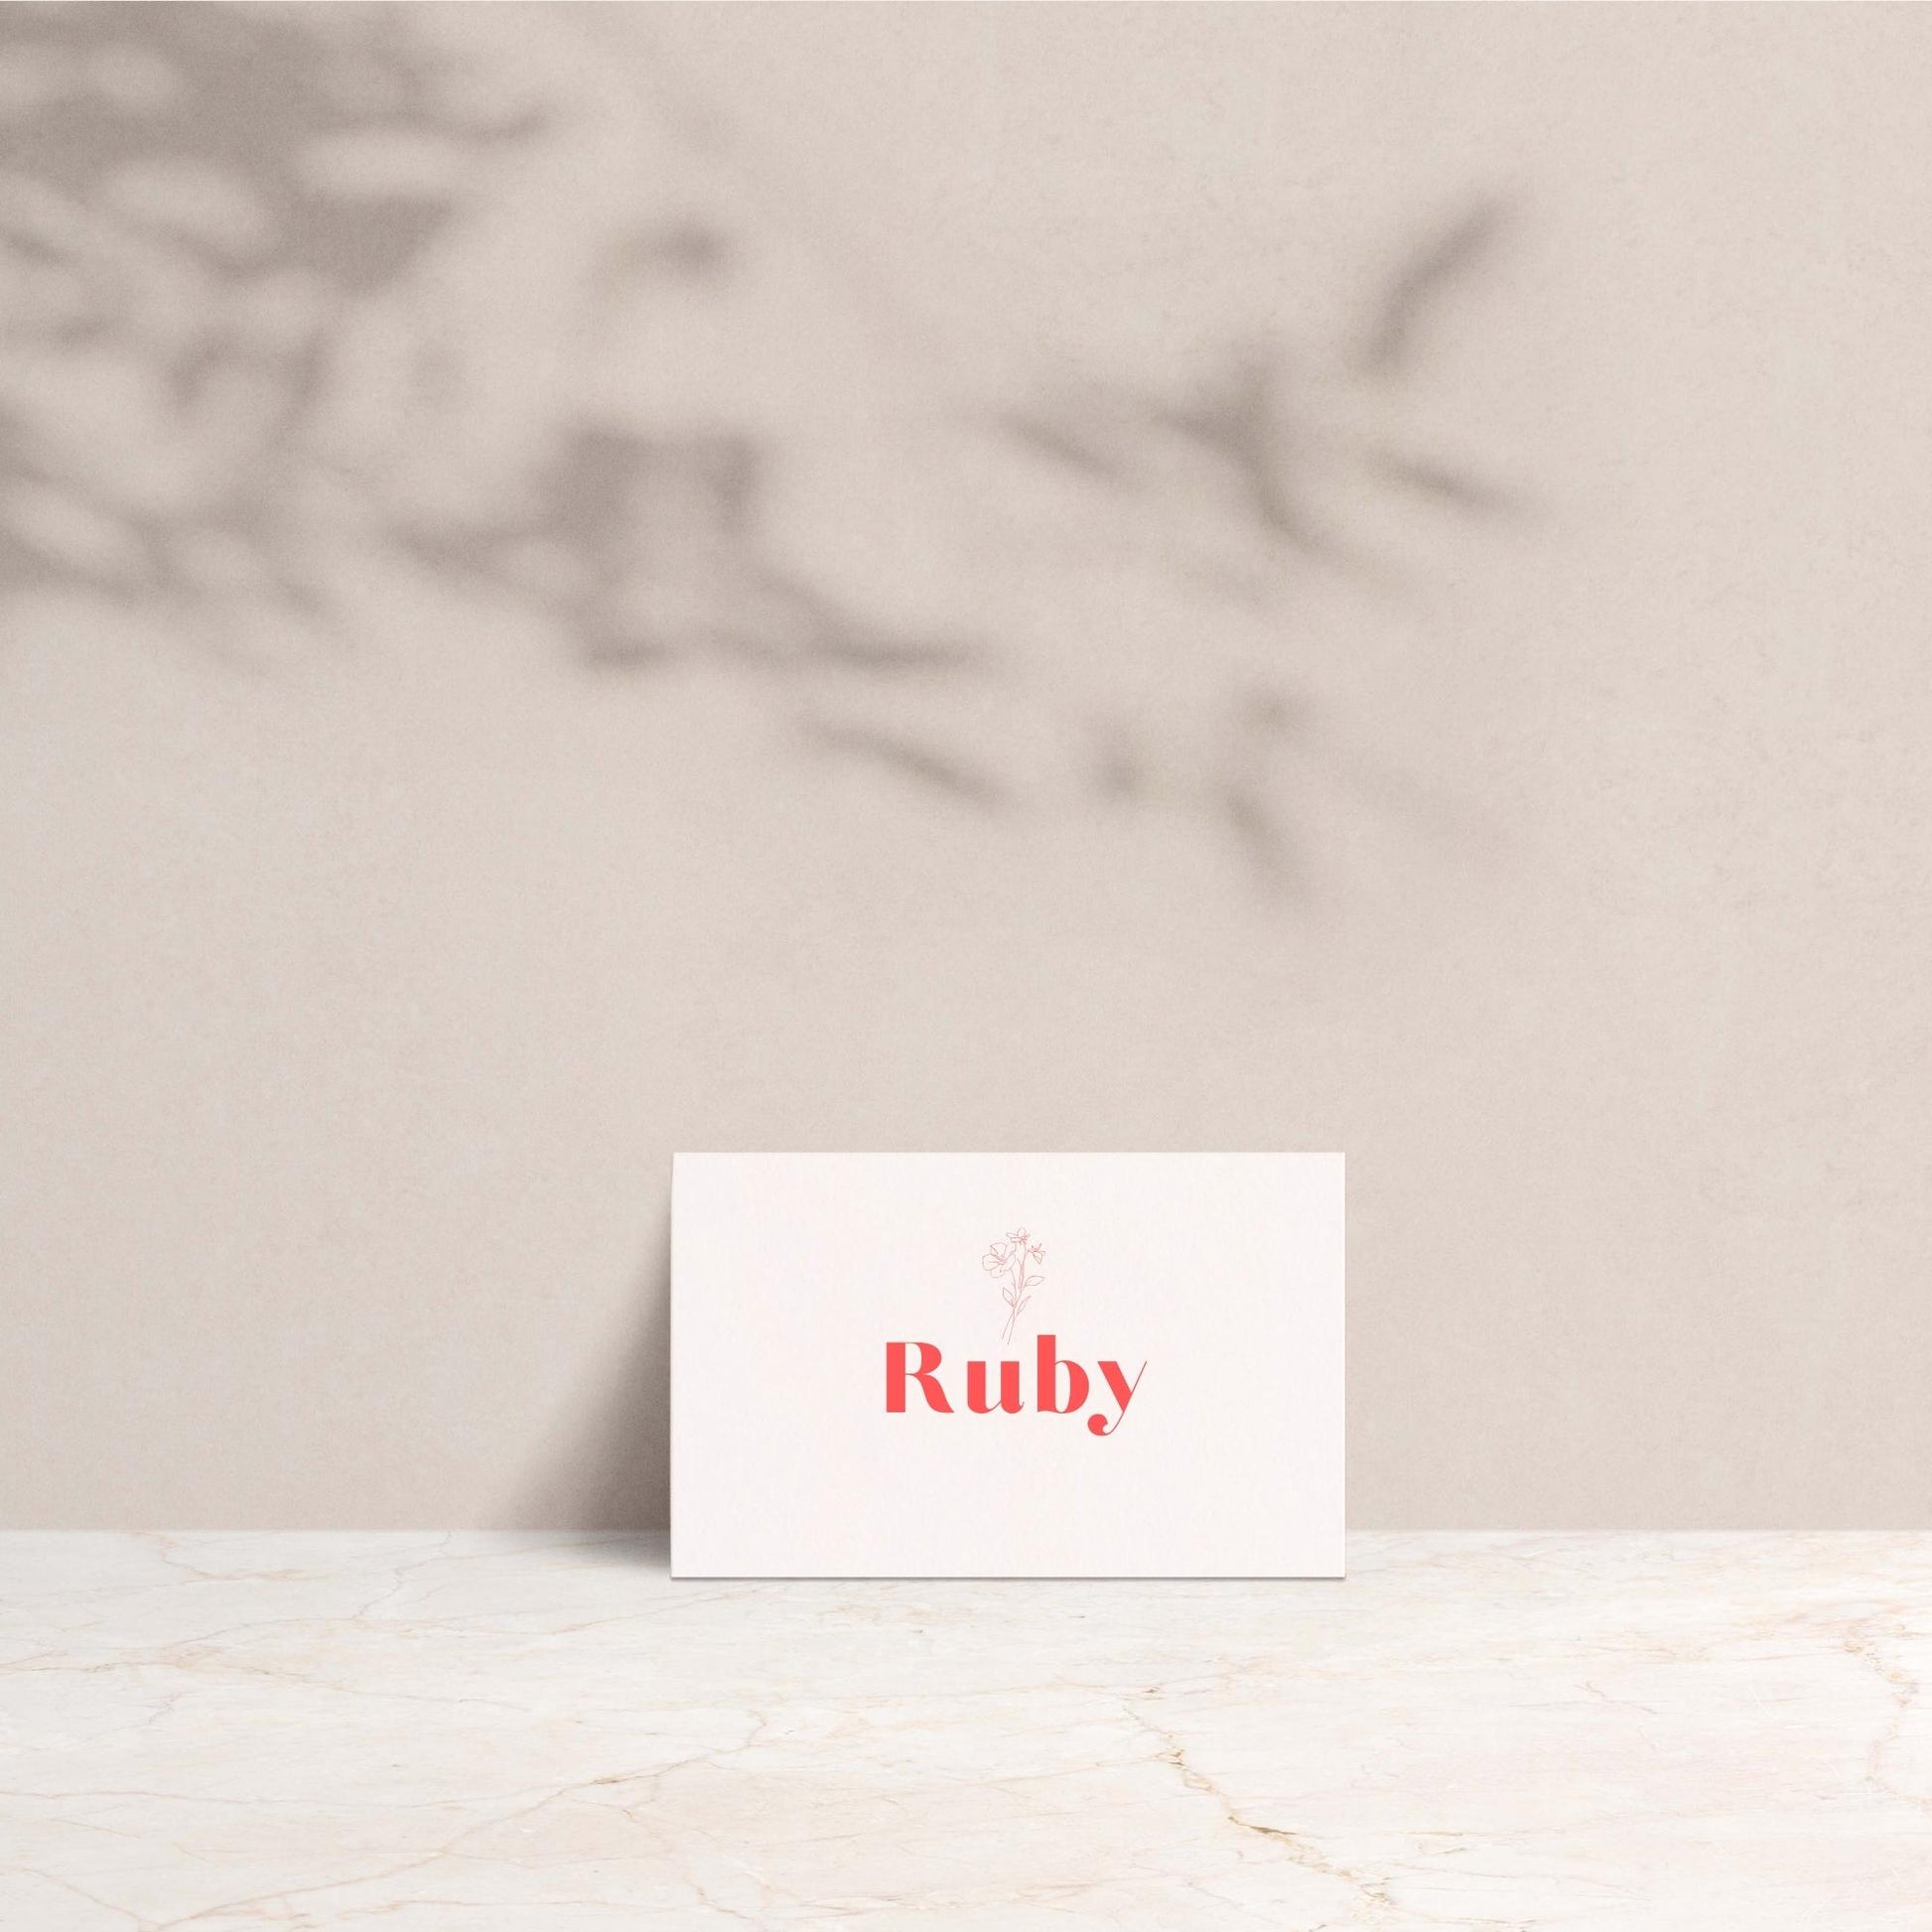 RUBY Wedding Place Cards - Wedding Reception Stationery available at The Ivy Collection | Luxury Wedding Stationery